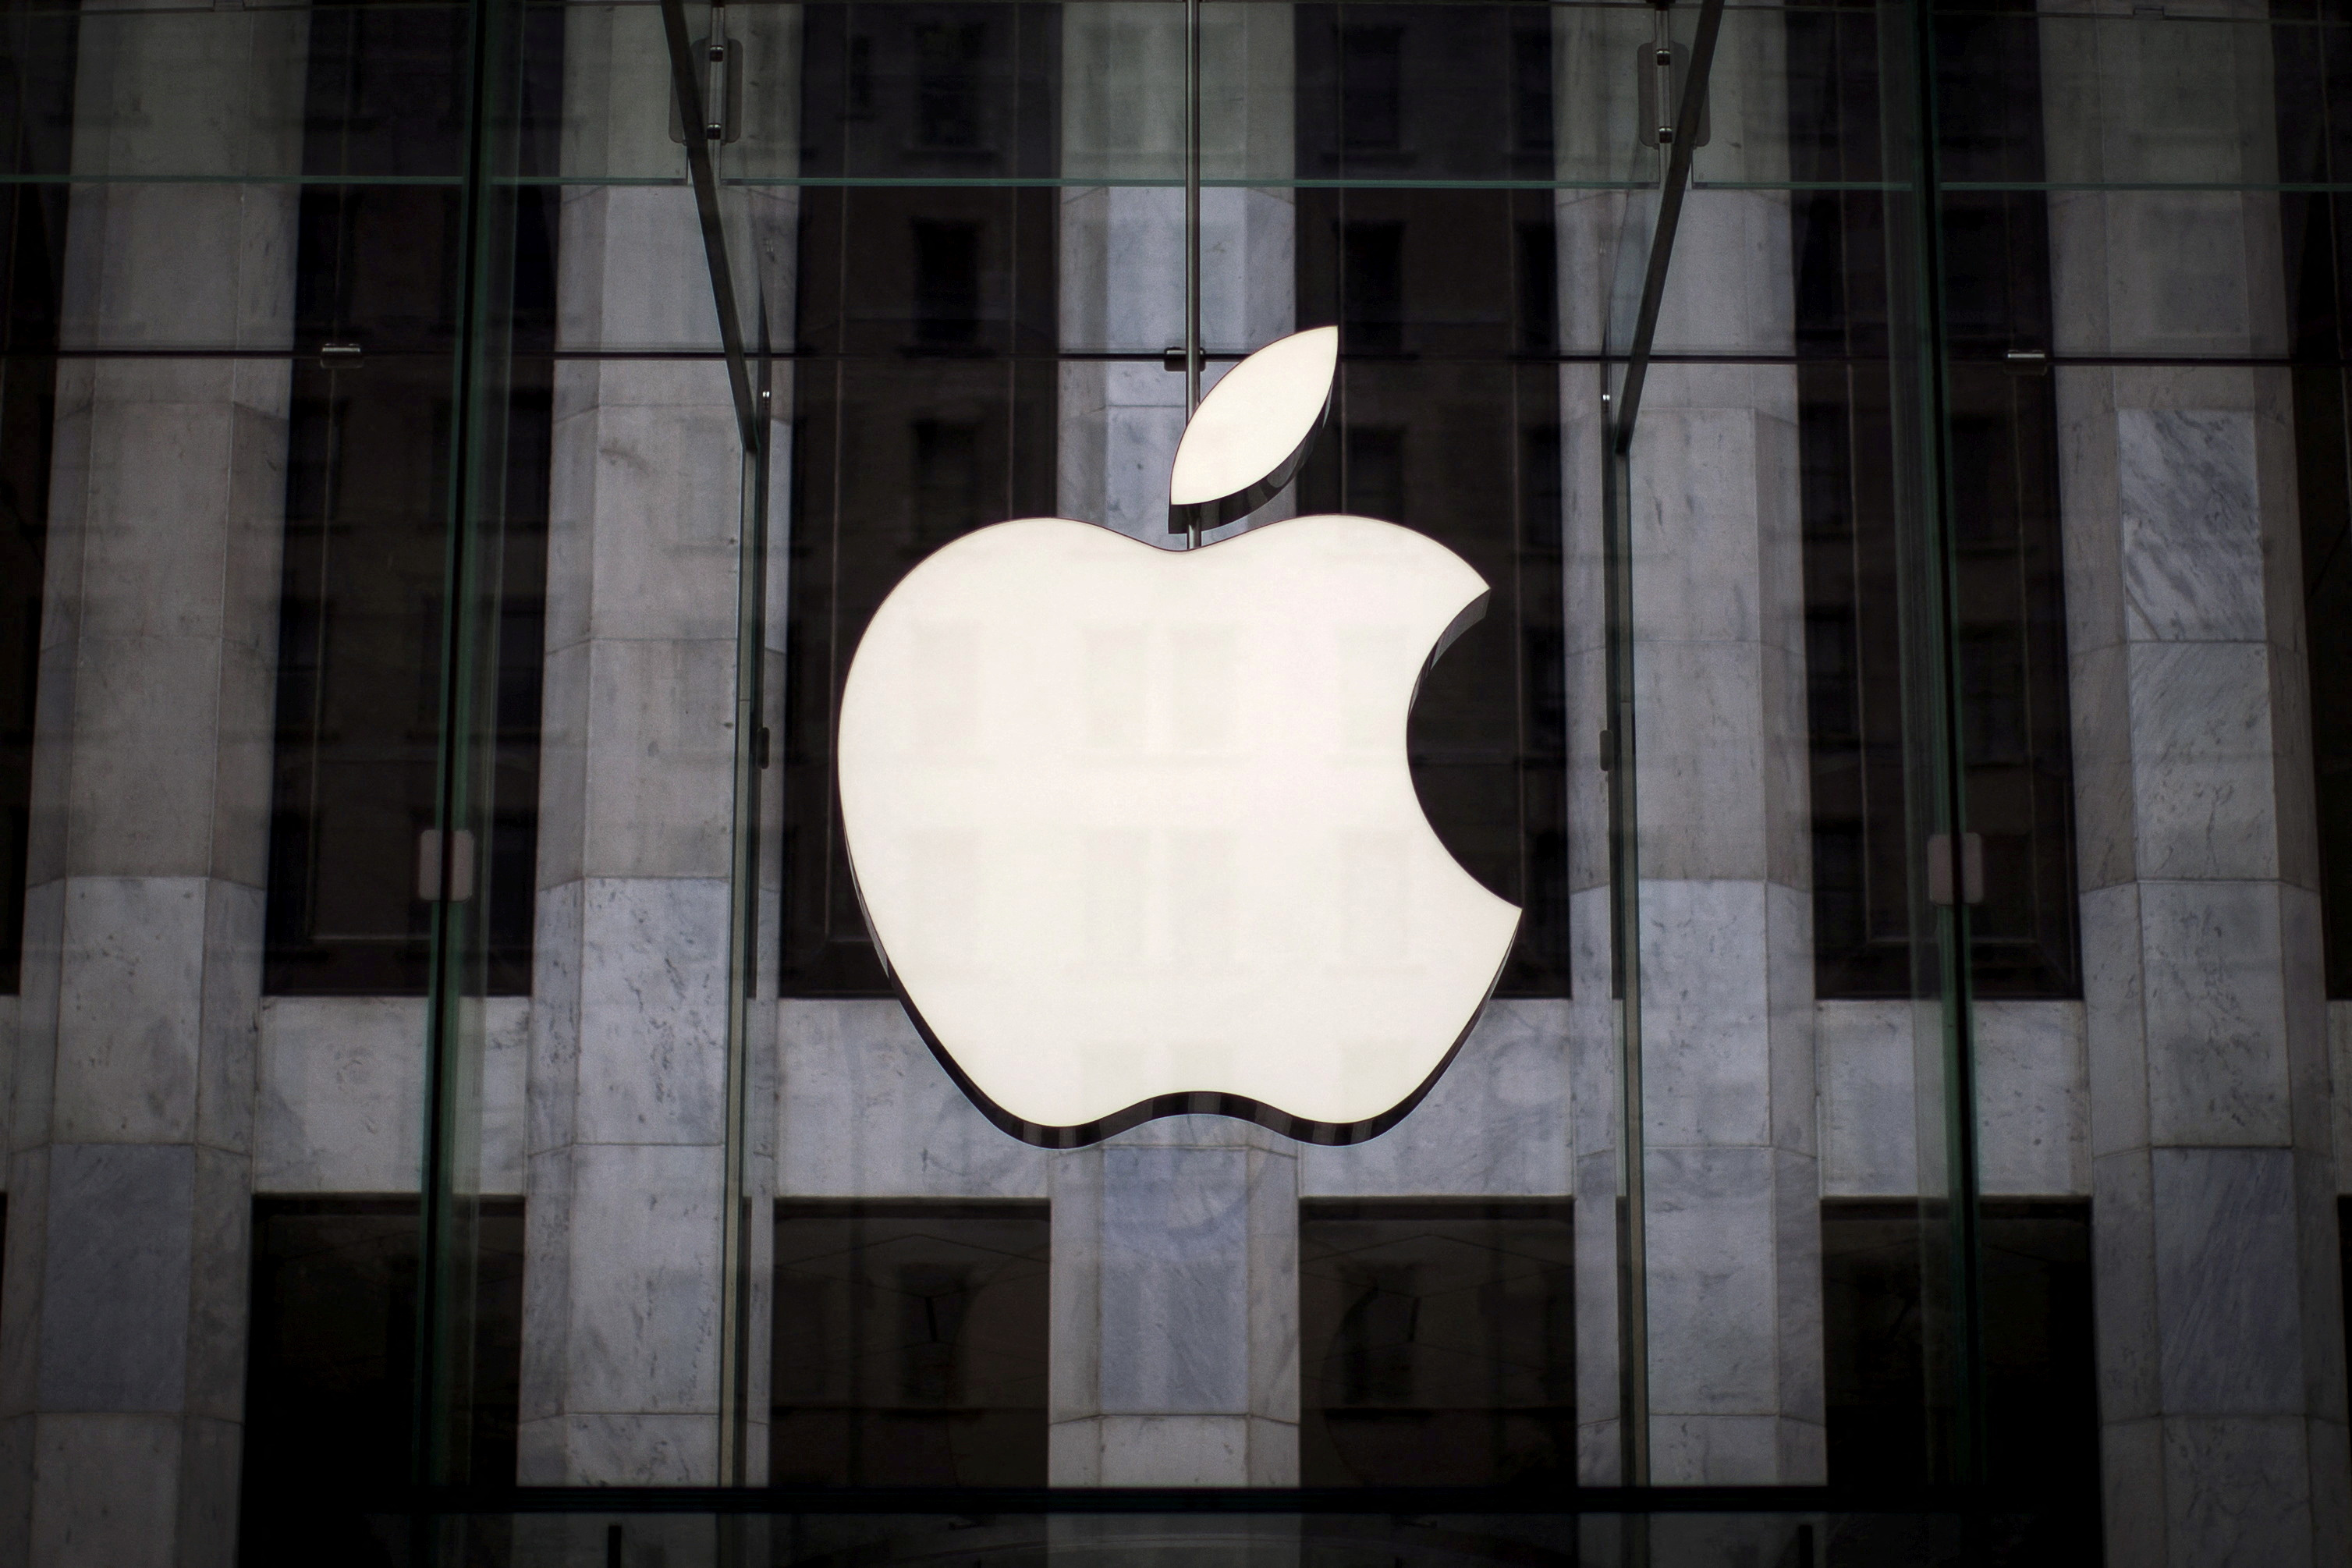 Apple is sued by French app developers over app store fees | Reuters